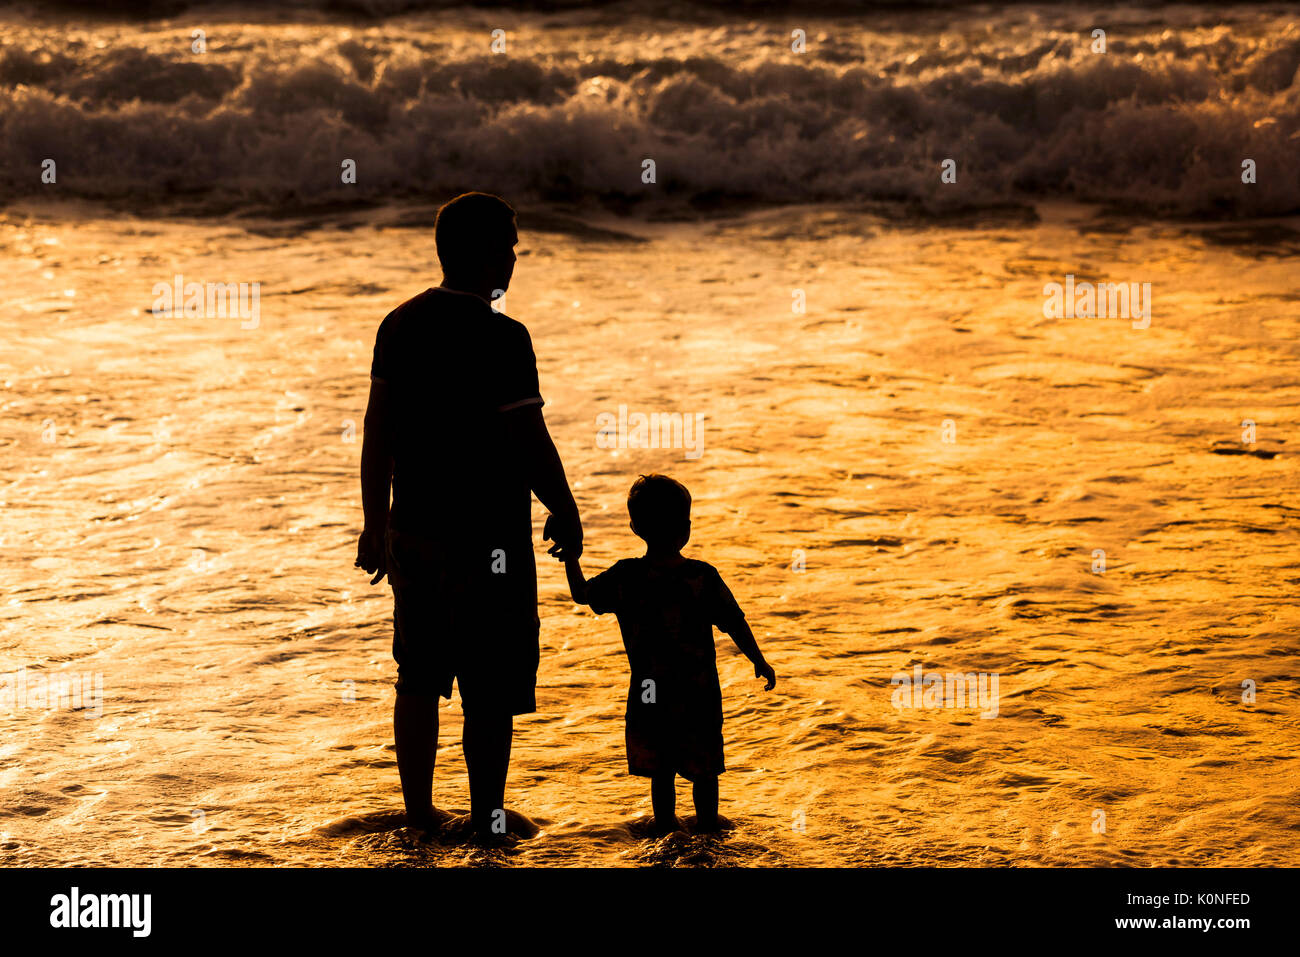 The silhouette of a father and his young son holding hands and standing in the sea. Stock Photo